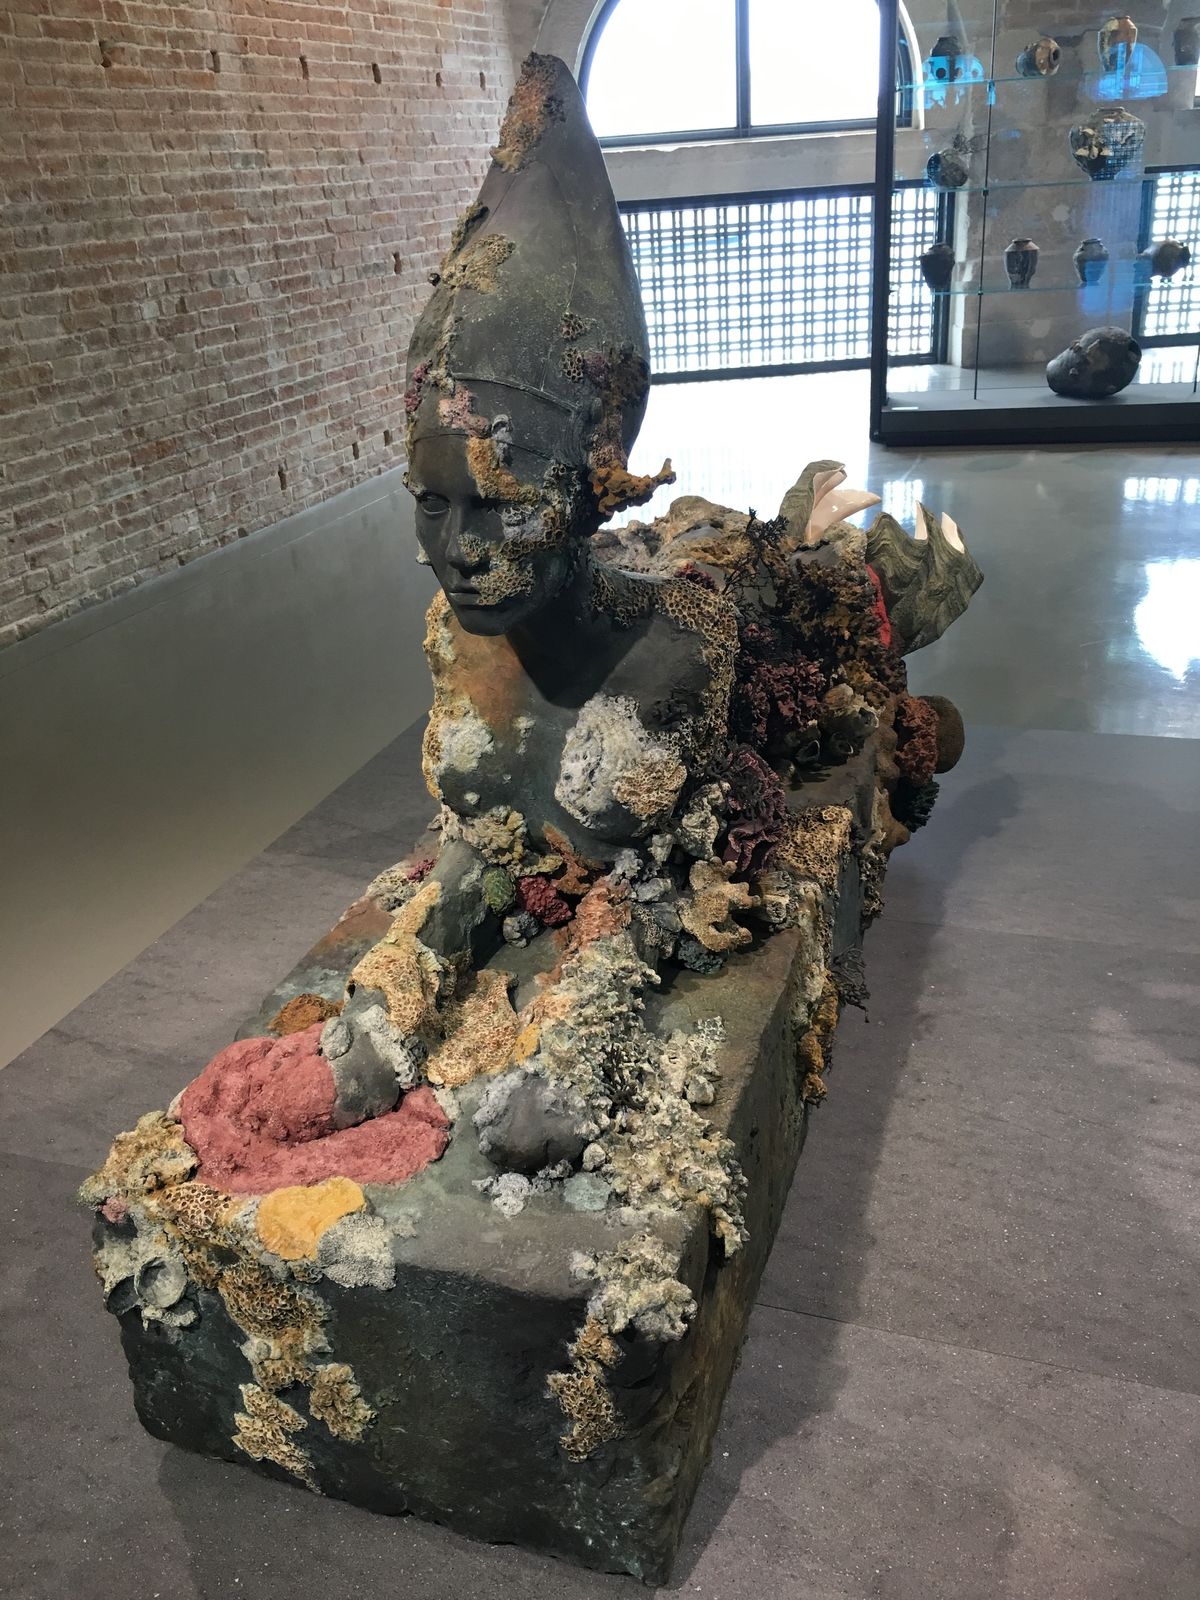 Damien Hirst, Sphinx (2017), on view in Venice Photo by Joanna Penn, via Flickr